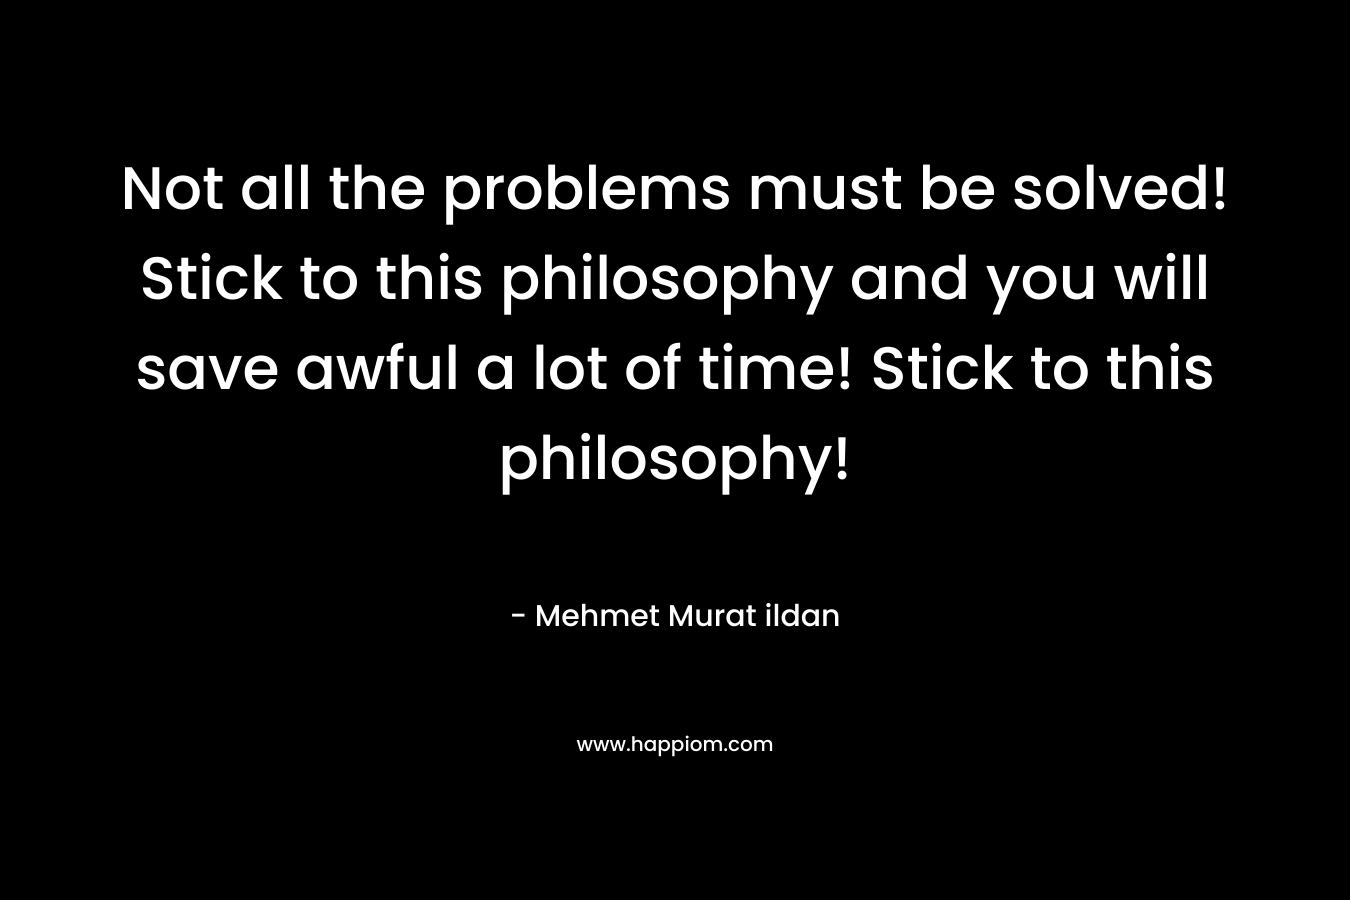 Not all the problems must be solved! Stick to this philosophy and you will save awful a lot of time! Stick to this philosophy! – Mehmet Murat ildan